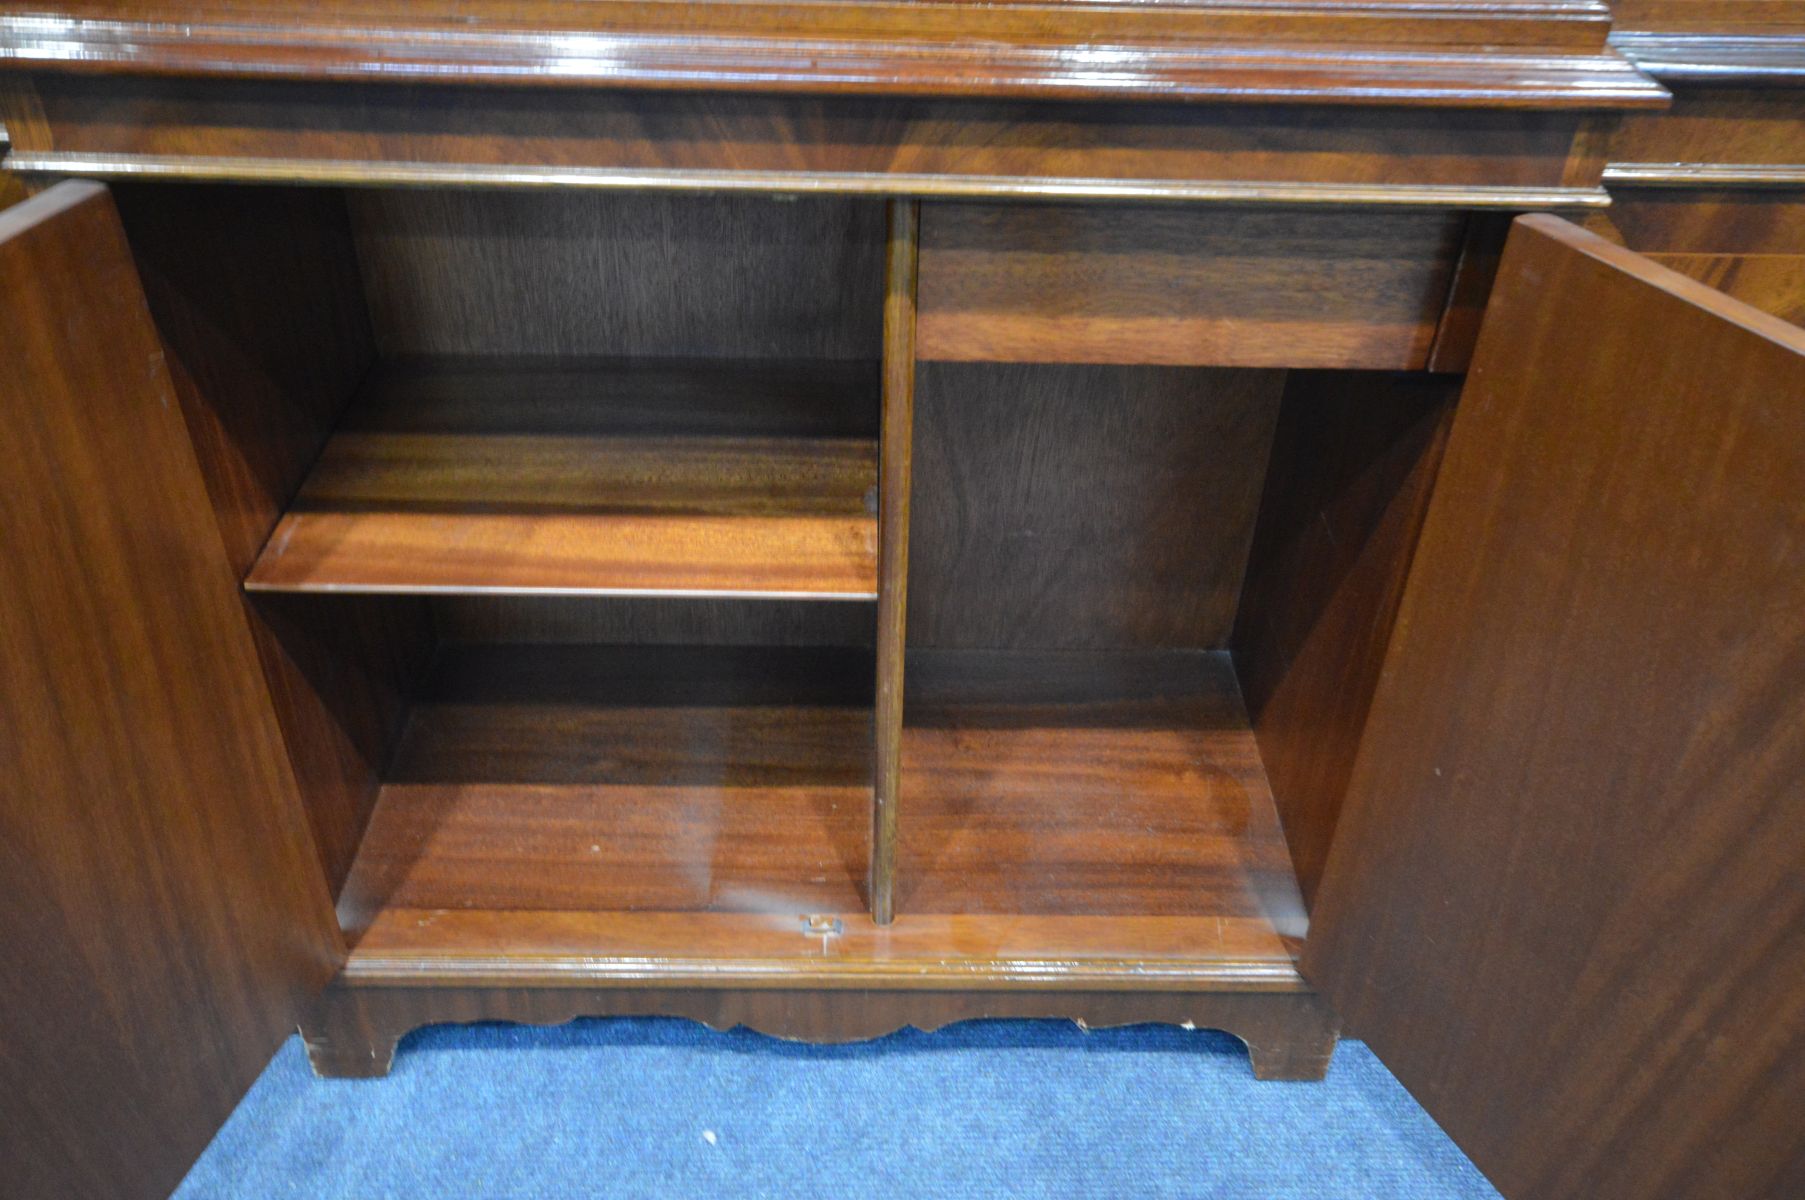 A REPRODUDUCTION MAHOGANY BREAKFRONT BOOKCASE/COCKTAIL CABINET, the top section with two glazed - Image 4 of 4